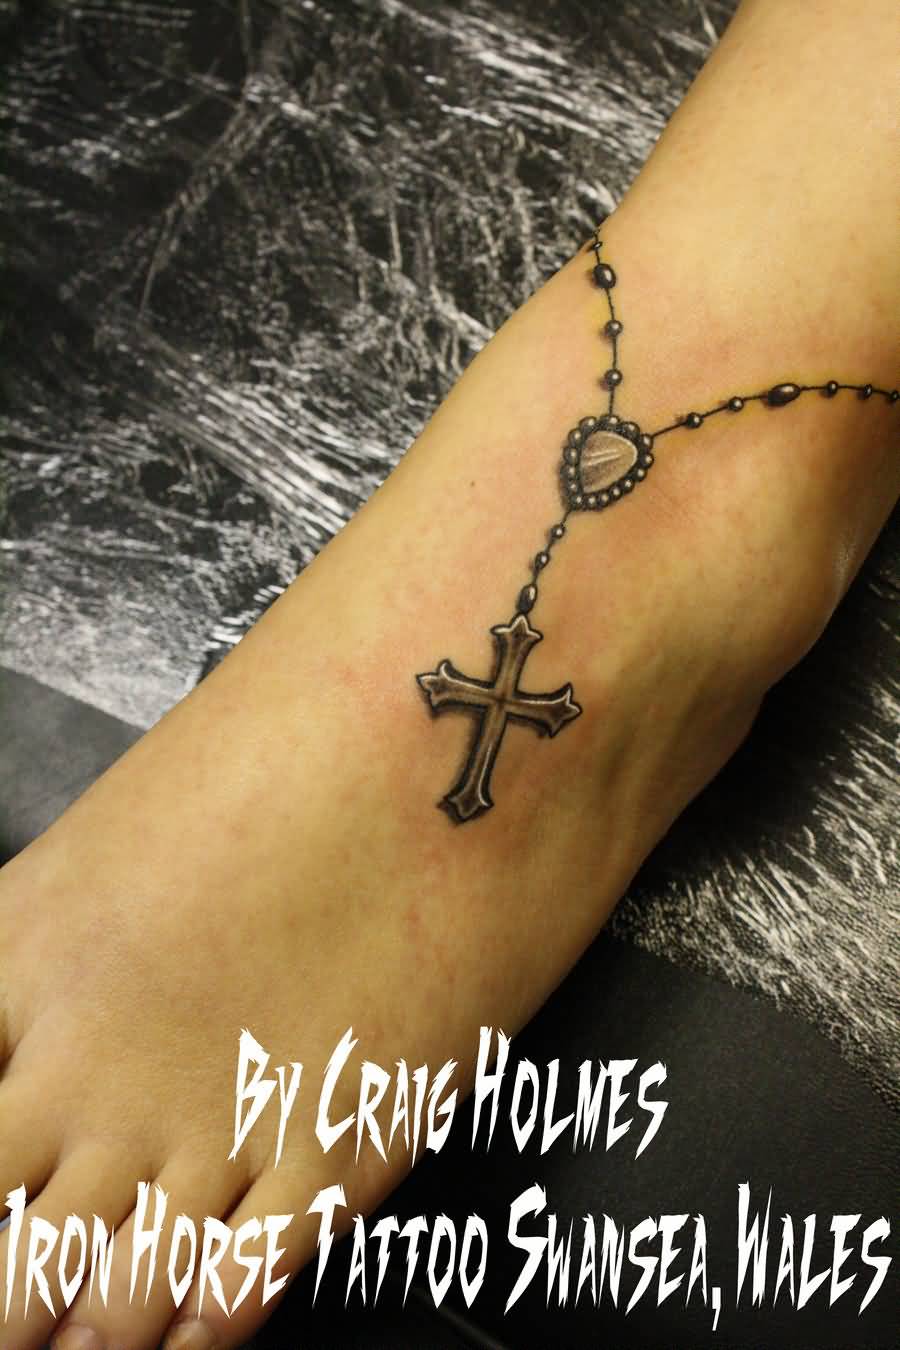 Rosary Beads With Cross Tattoo On Foot